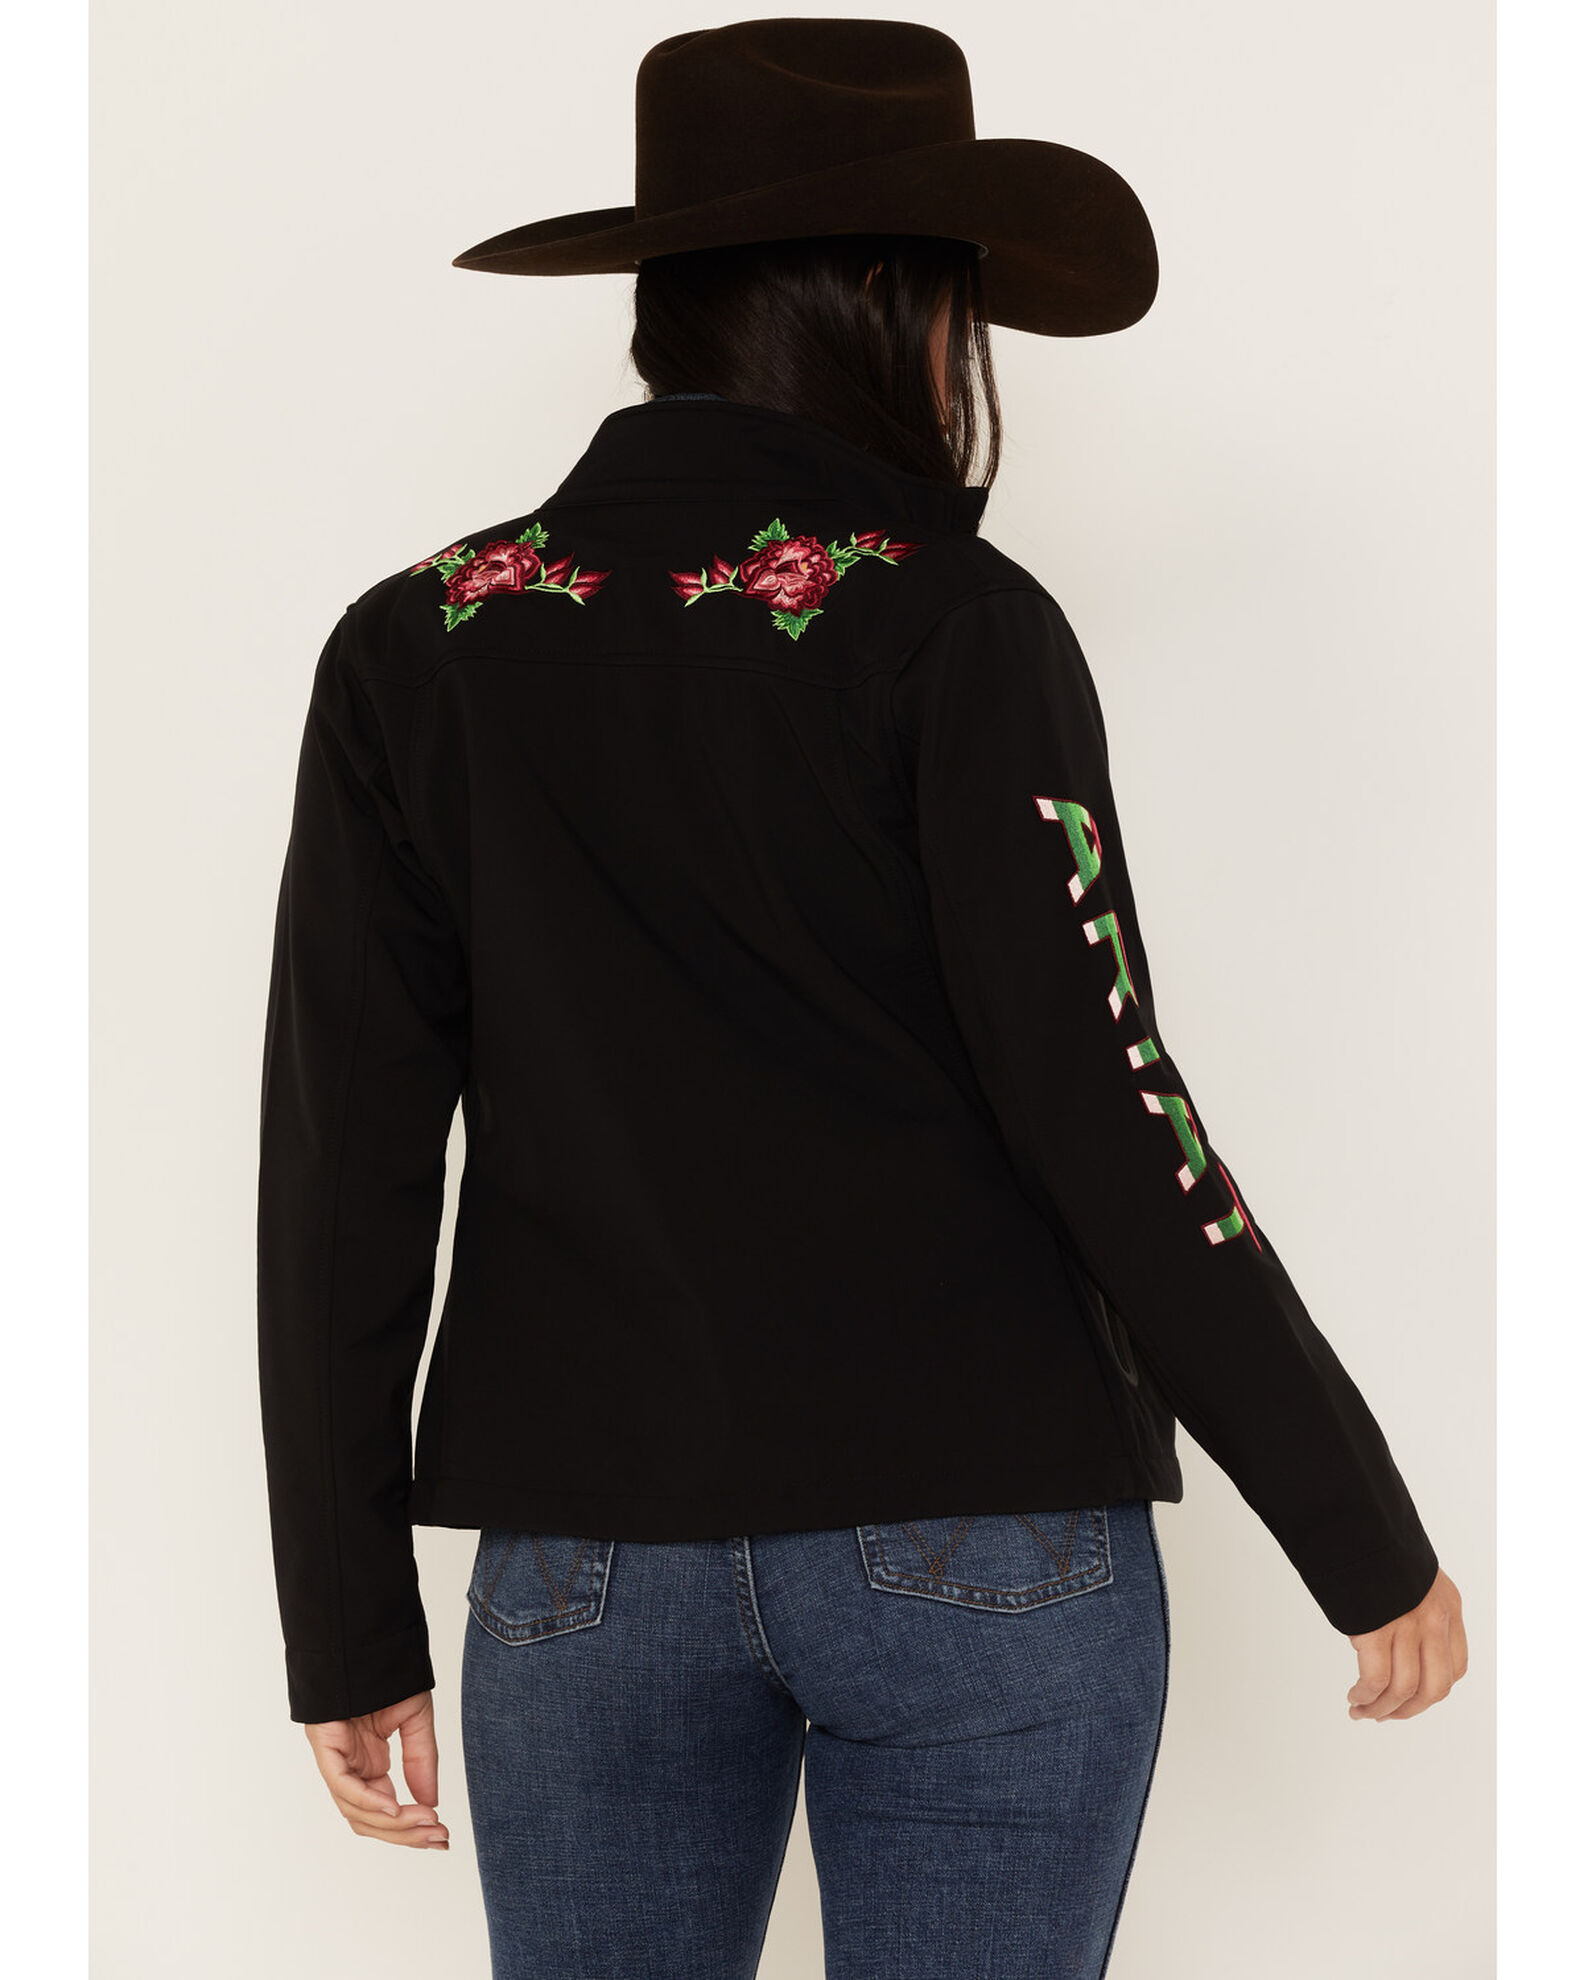 Product Name: Ariat Women's Floral Embroidered Rosas Team Softshell Jacket